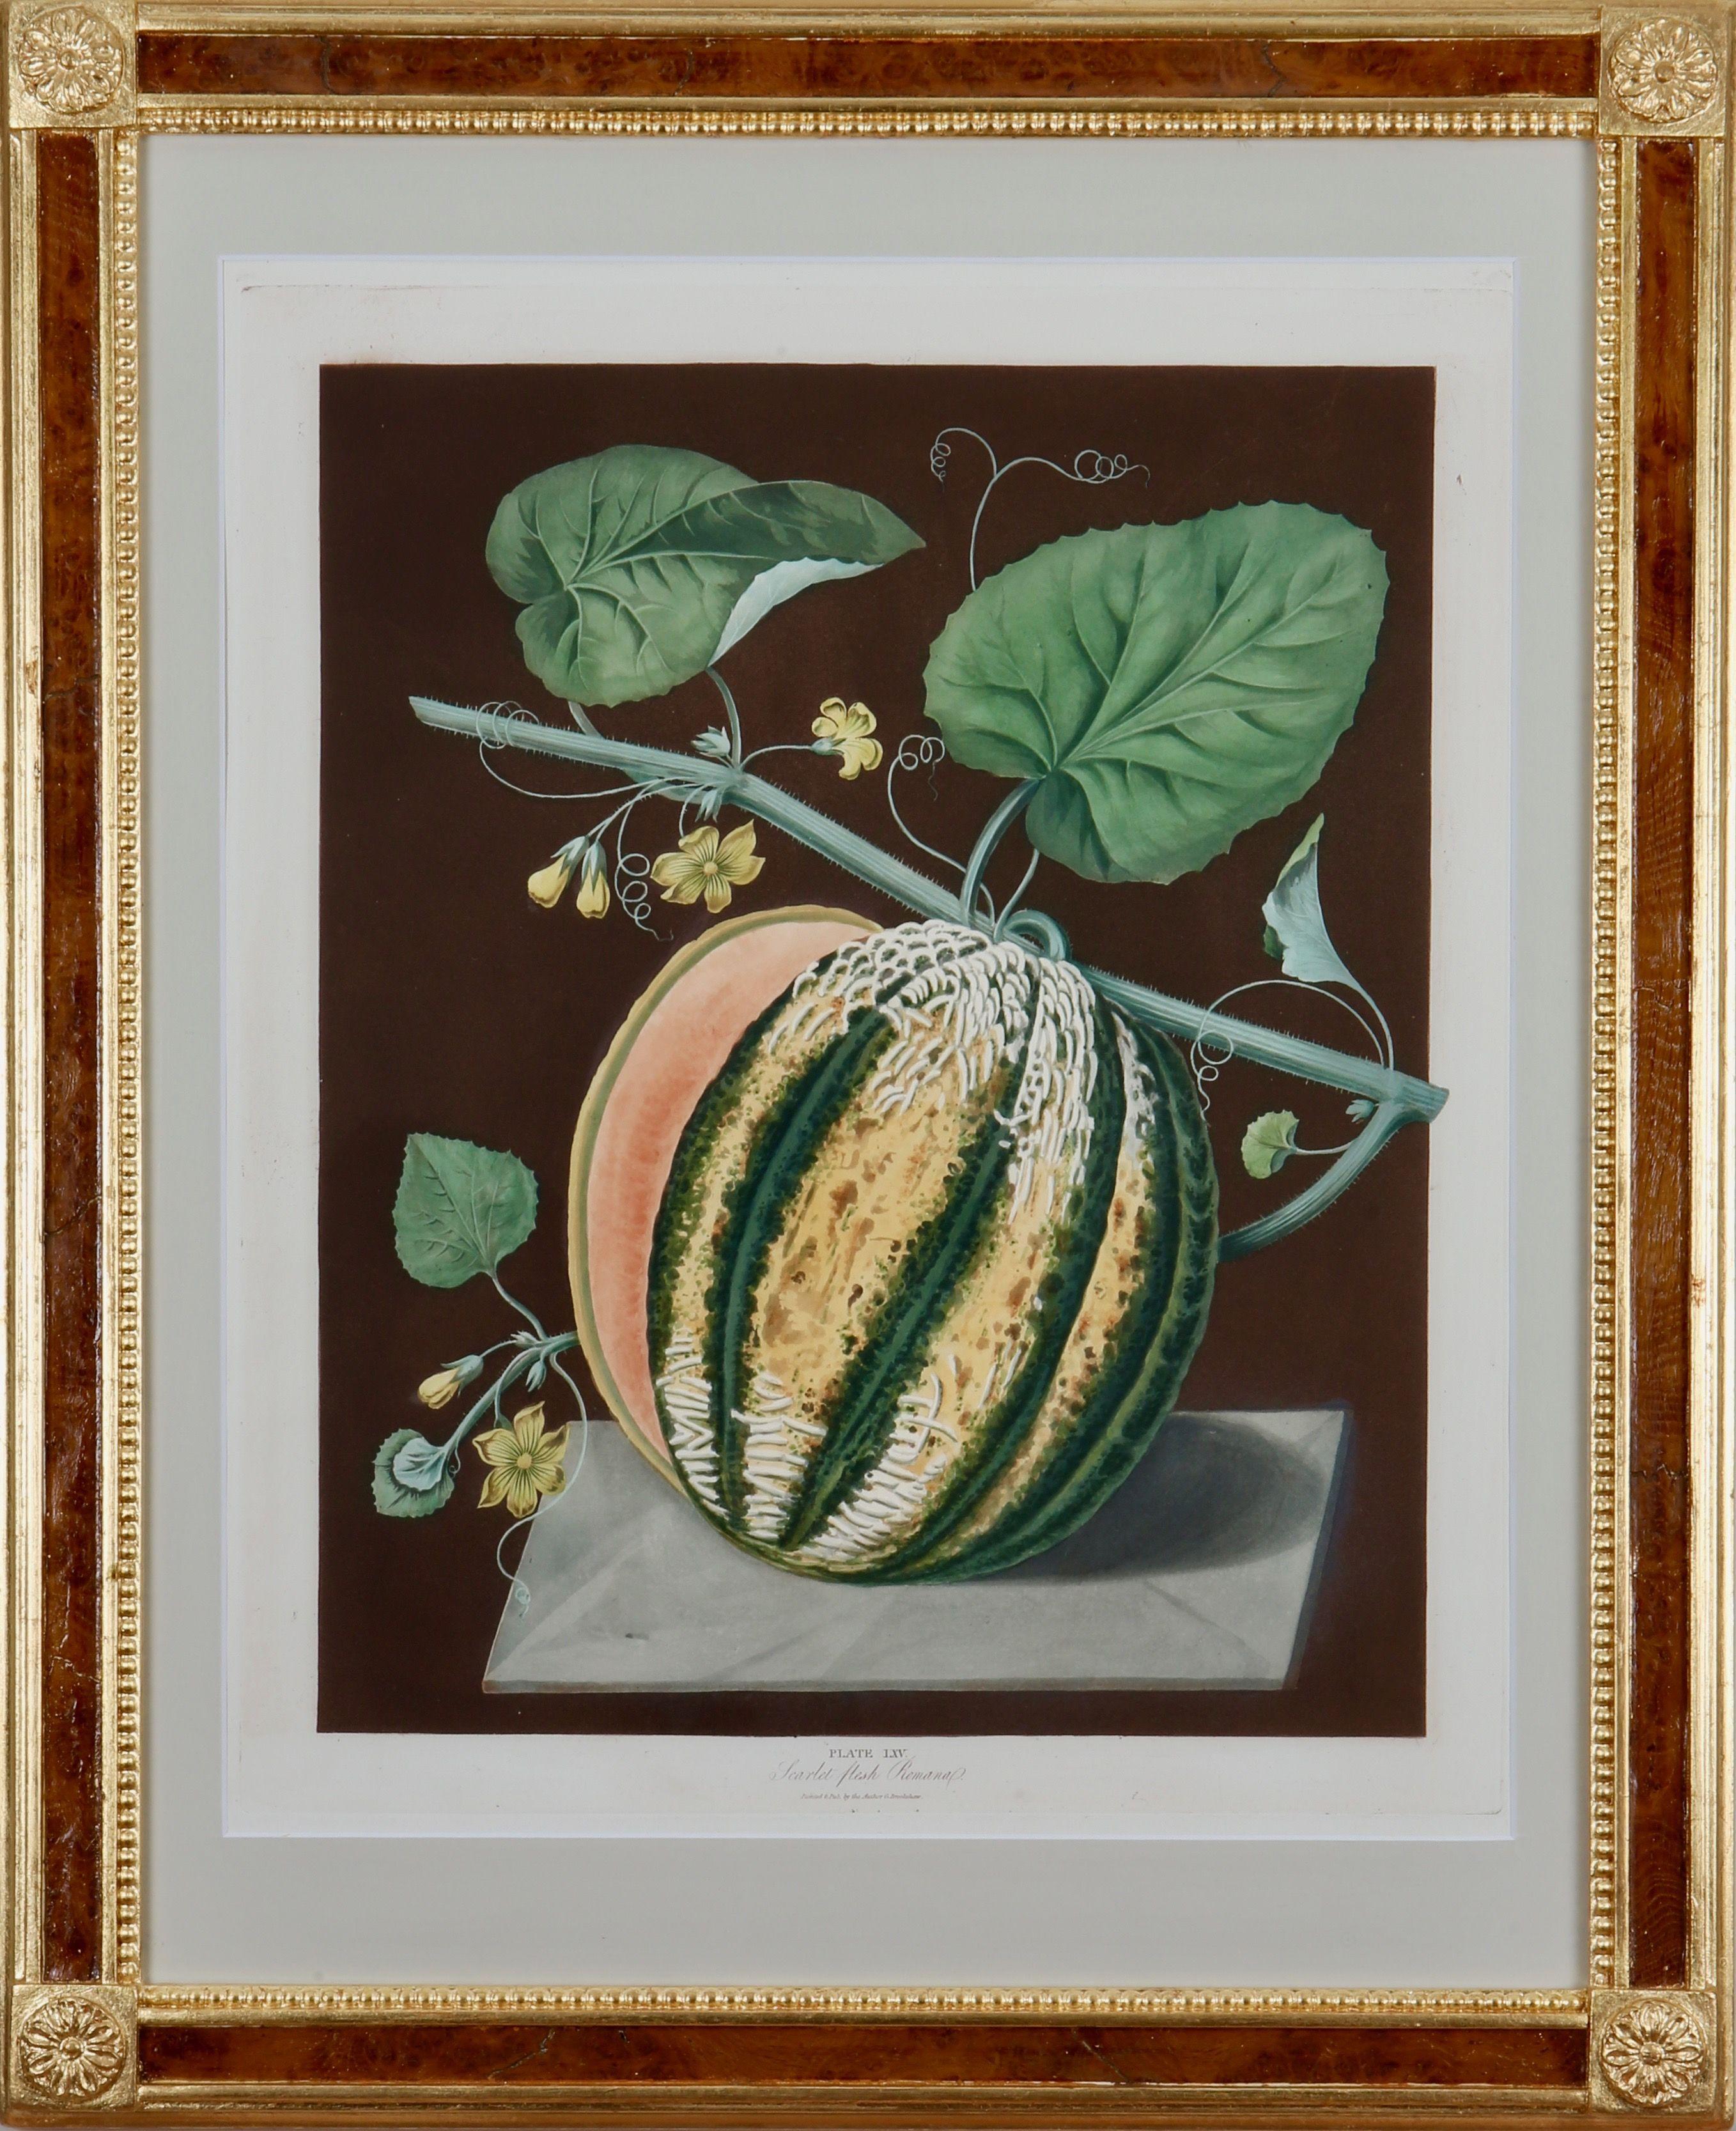 The "Pomona Britannica" (1812) depicts varieties of fruits cultivated at the Royal Gardens at Hampton Court and Kensington Gardens at the beginning of the nineteenth century. Brookshaw was originally a cabinet-maker but abandoned this career in